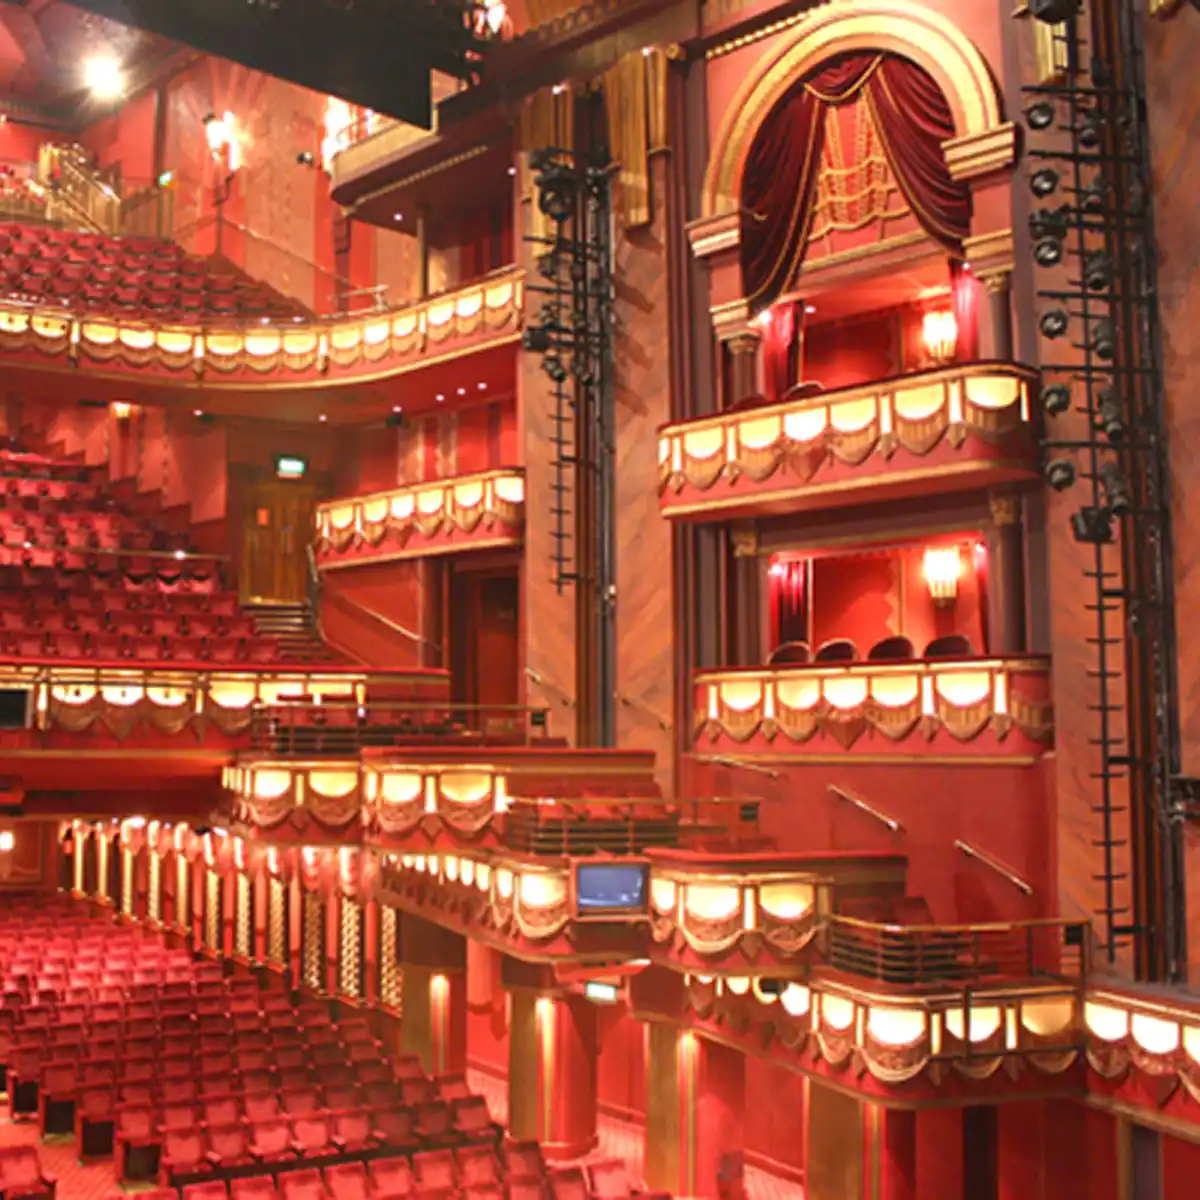 Interior photo at Prince Edward Theatre in London's West End